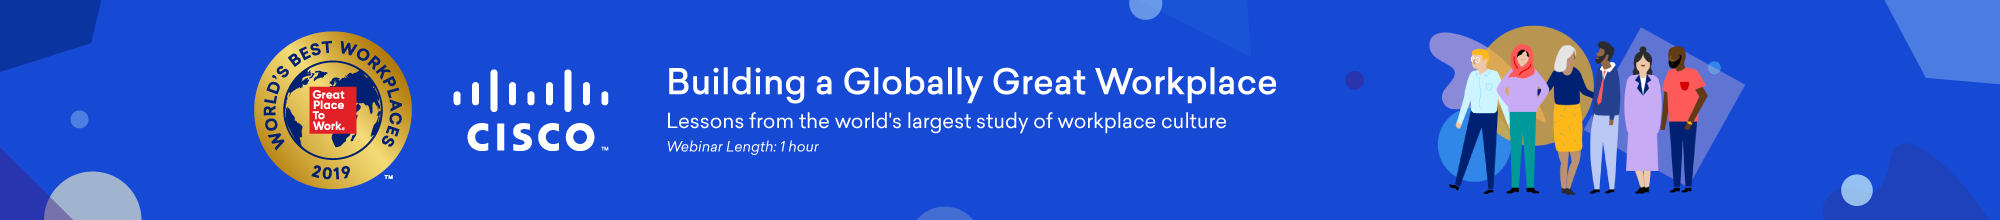 Building a Globally Great Workplace